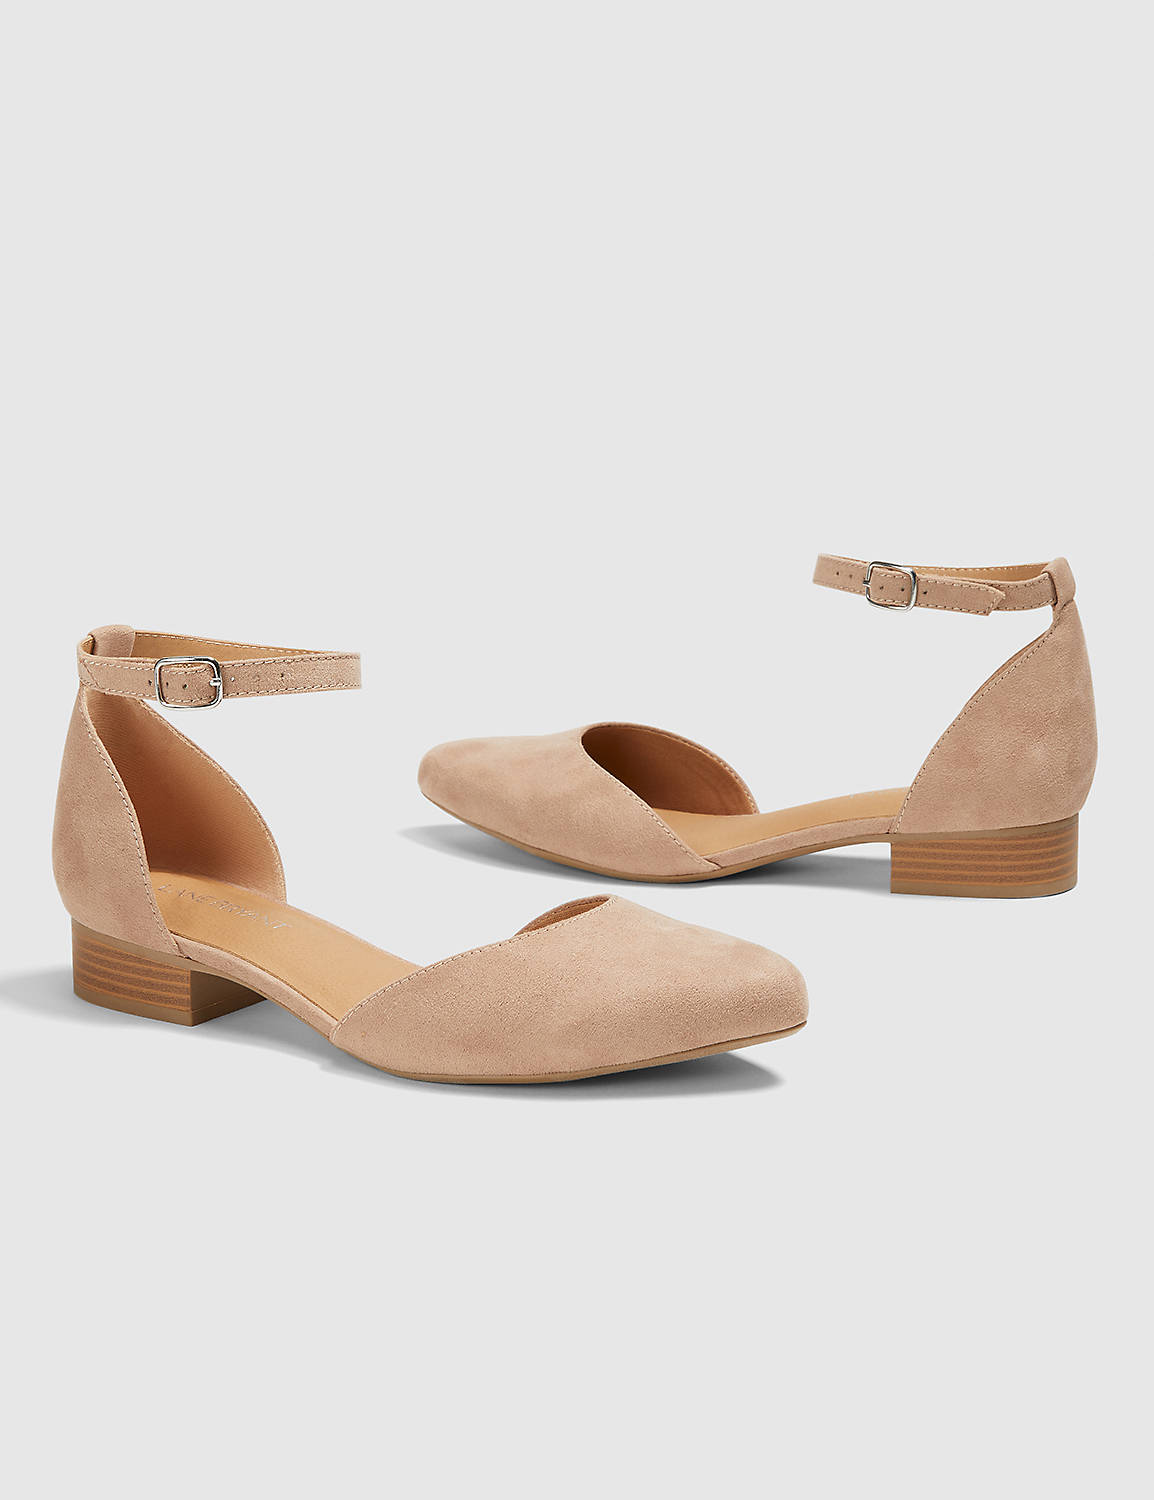 Suede Tan 2pc Flat with Strap Product Image 1